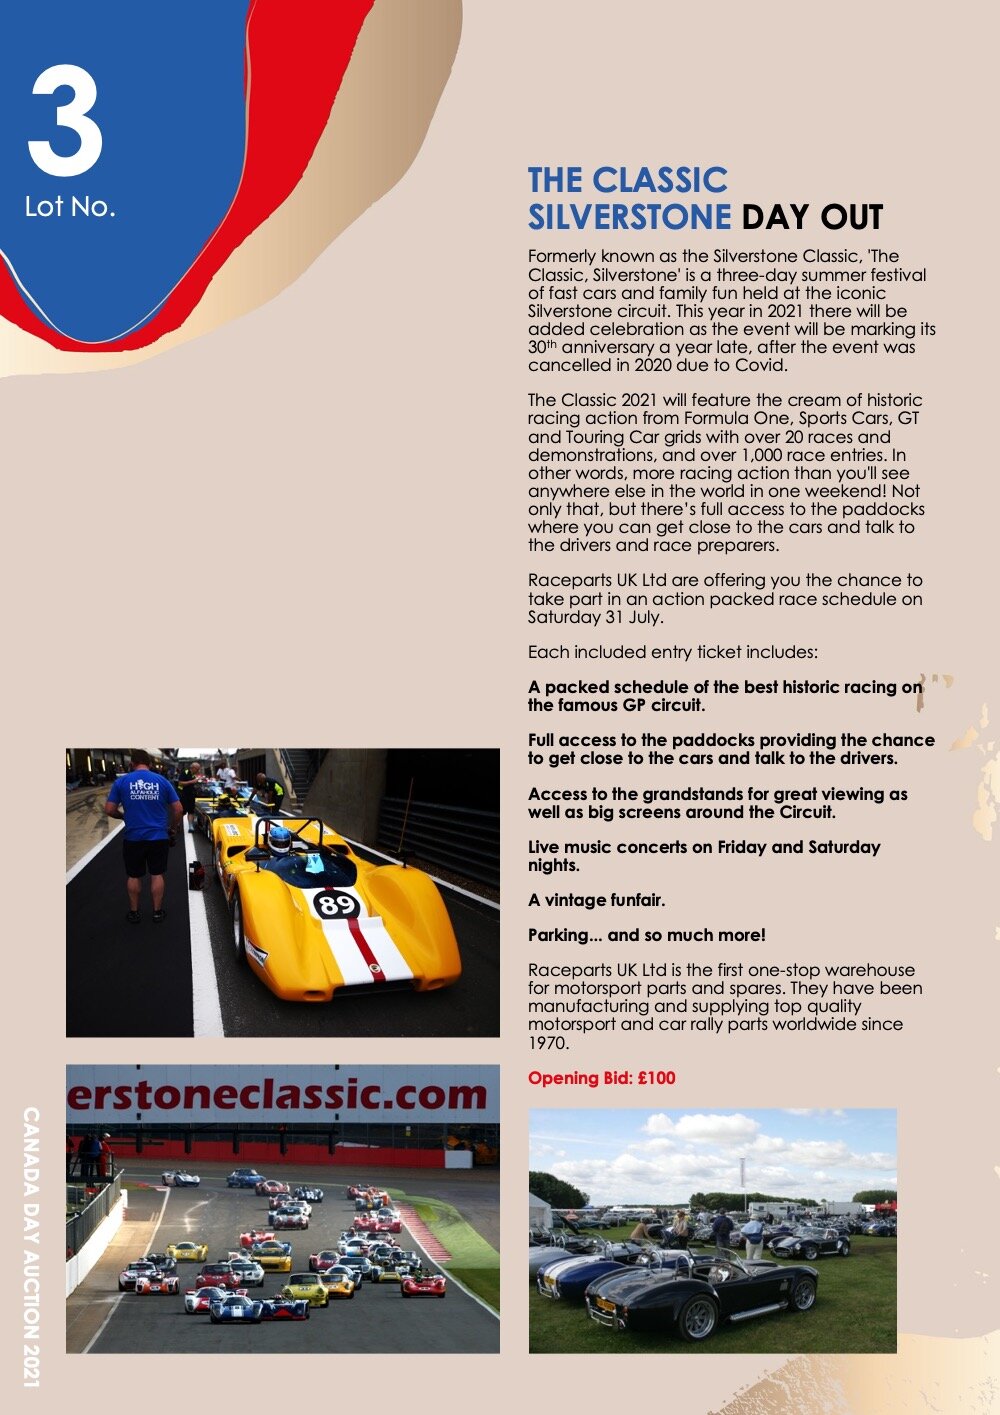   THE CLASSIC SILVERSTONE DAY OUT    Formerly known as the Silverstone Classic, 'The Classic, Silverstone' is a three-day summer festival of fast cars and family fun held at the iconic Silverstone circuit. This year in 2021 there will be added celebr